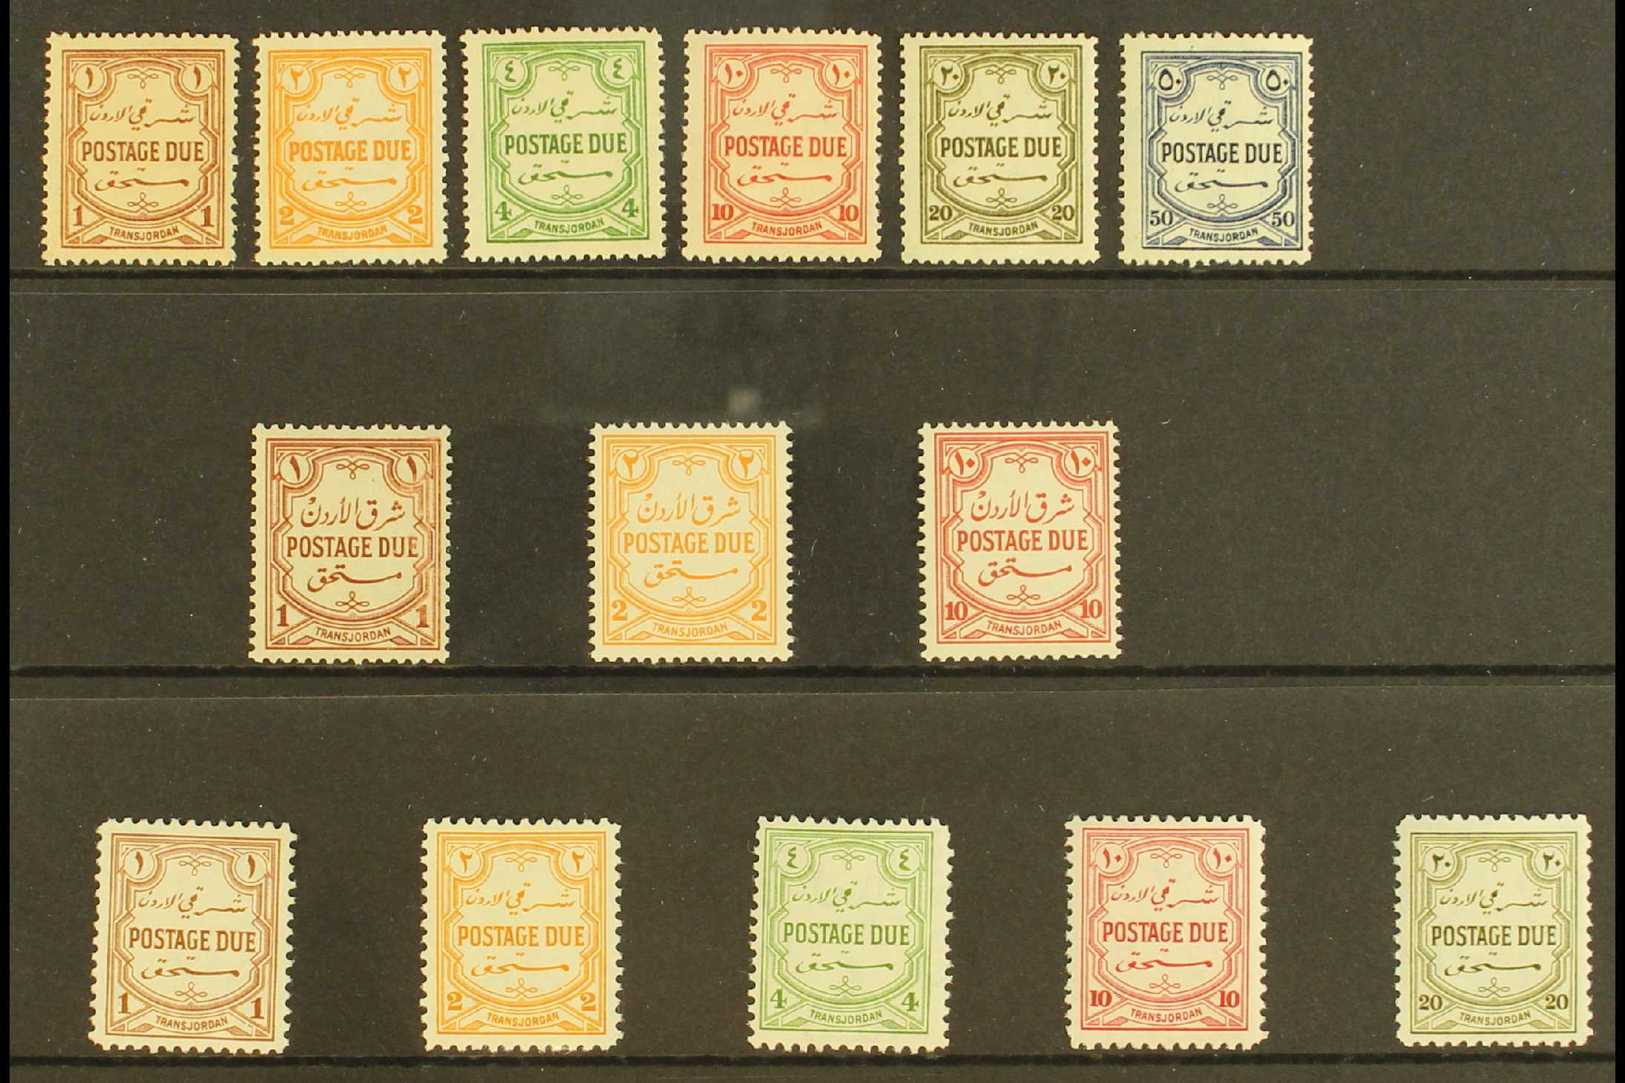 POSTAGE DUE 1929-49 MINT COLLECTION. A Complete Run From 1929-49, SG D189/94, SG D230/32 & SG D244/48, A Fine Mint Group - Jordan